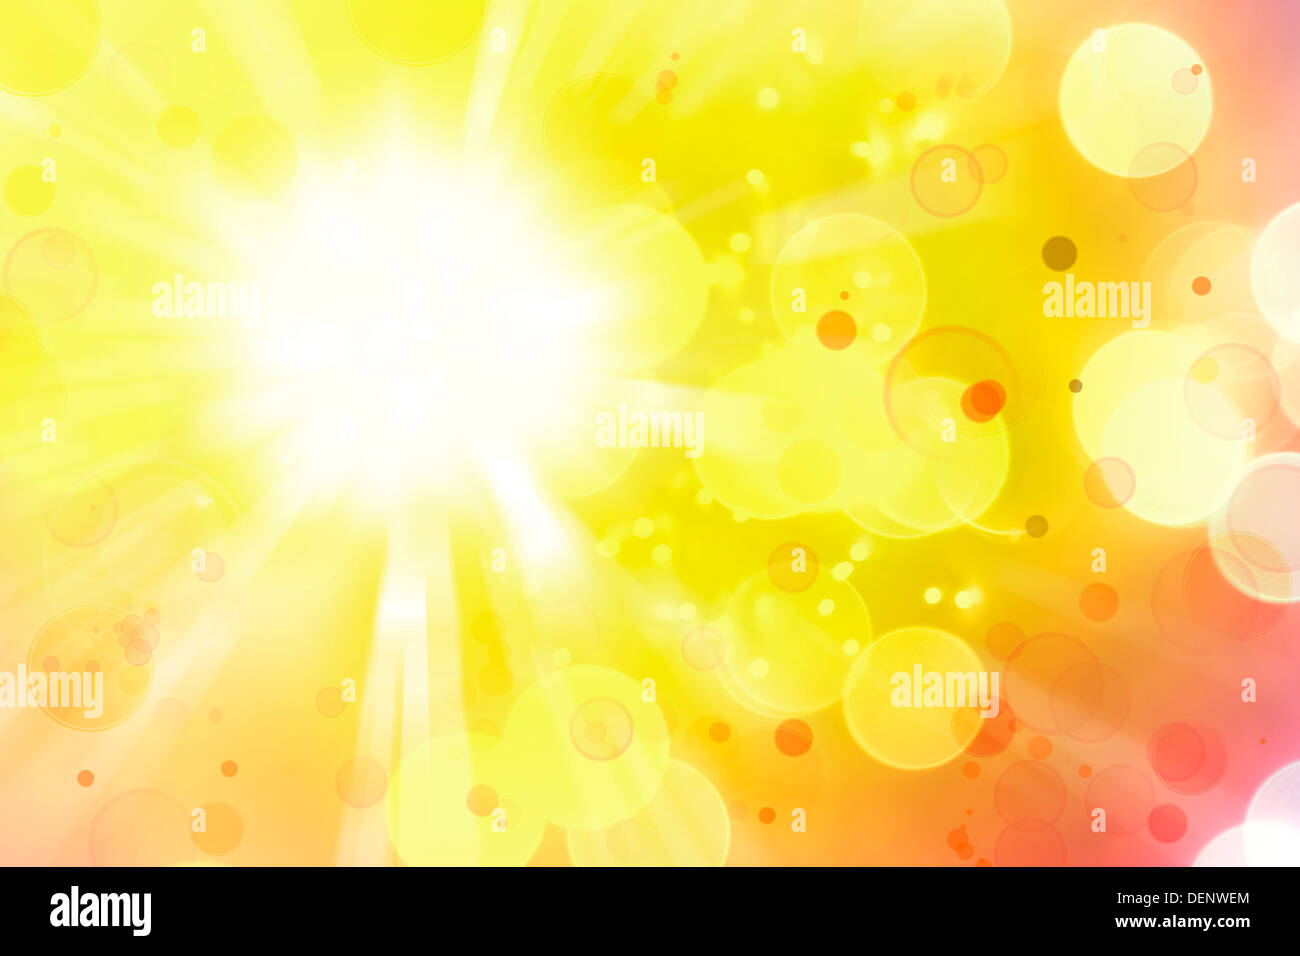 Bright light abstract background Stock Photo